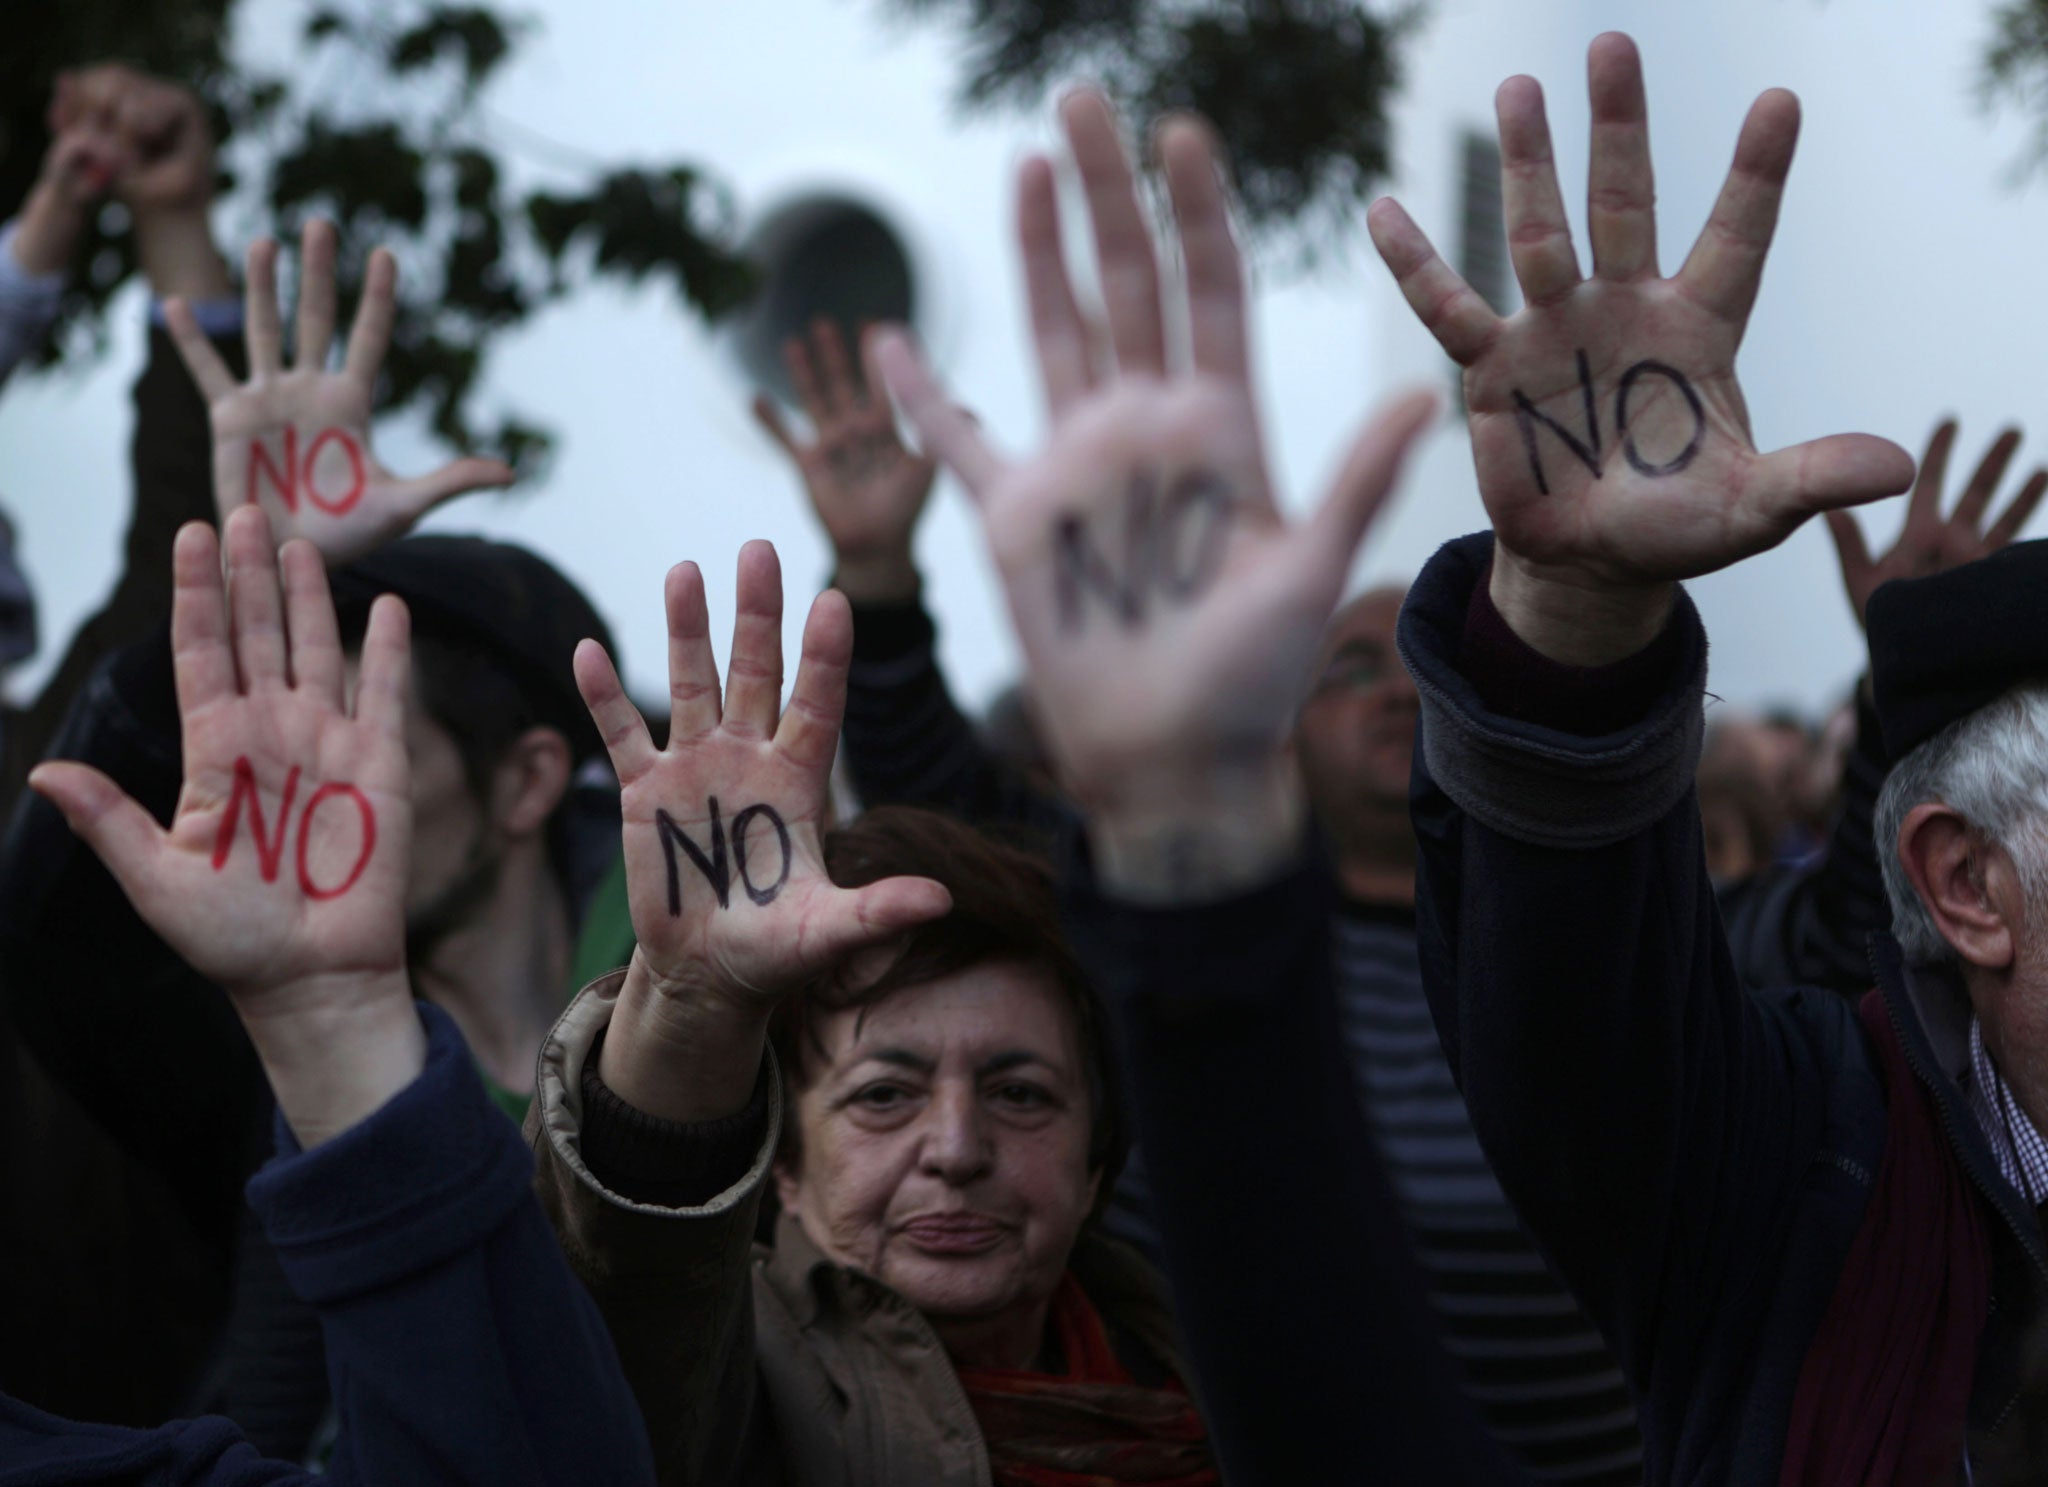 Cypriots show their palms reading 'No' during a protest against an EU bailout deal outside the parliament in Nicosia on March 18, 2013.